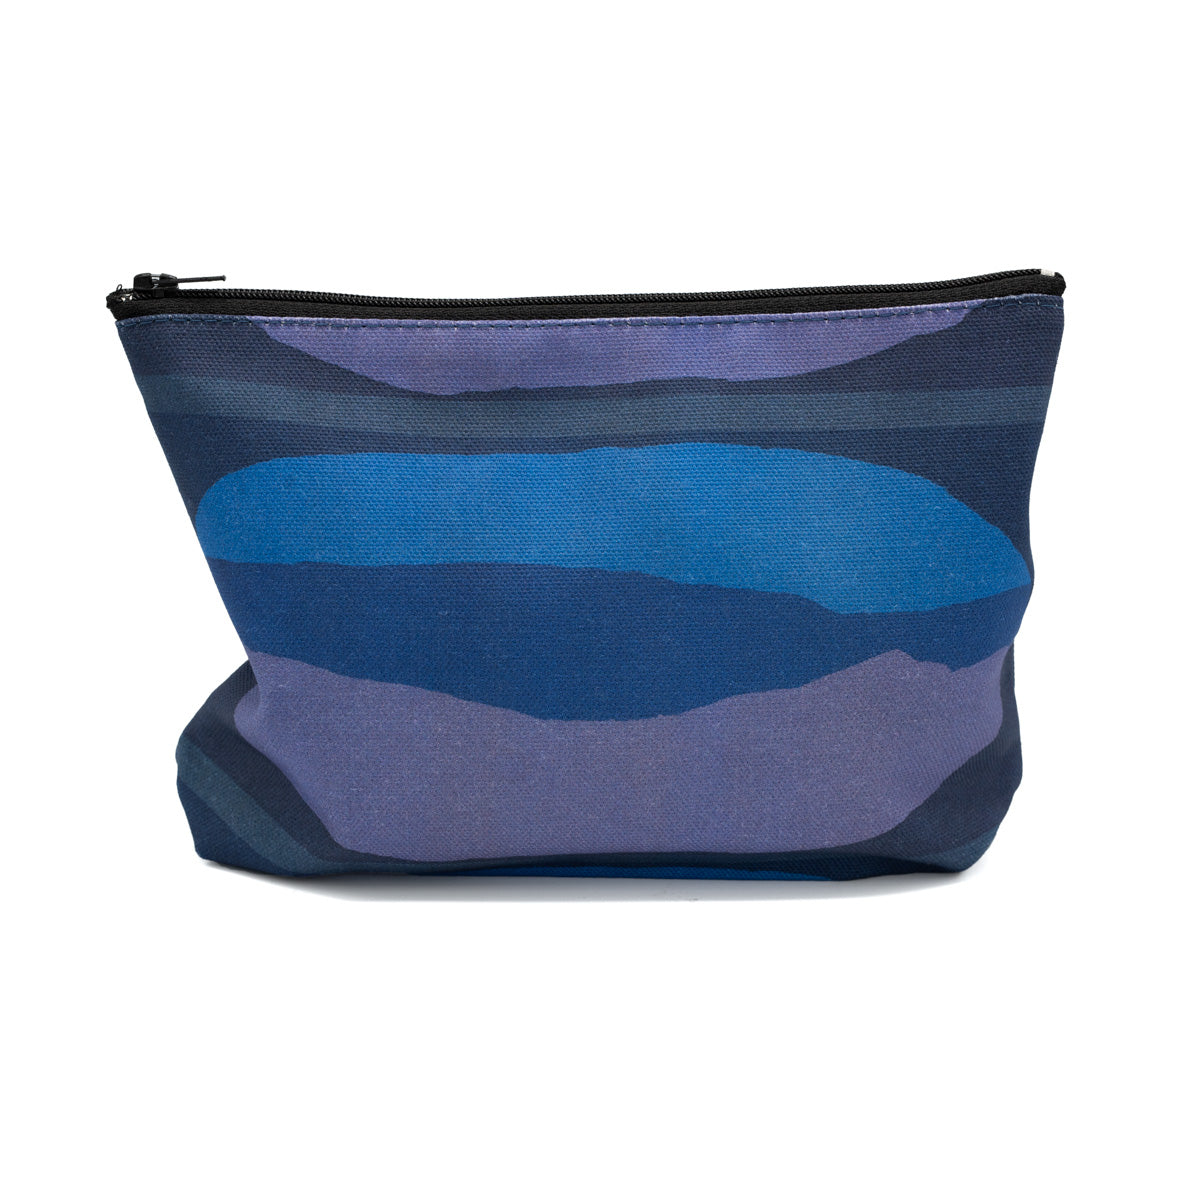 Cosmetics bag featuring blue design by Shirley Craven